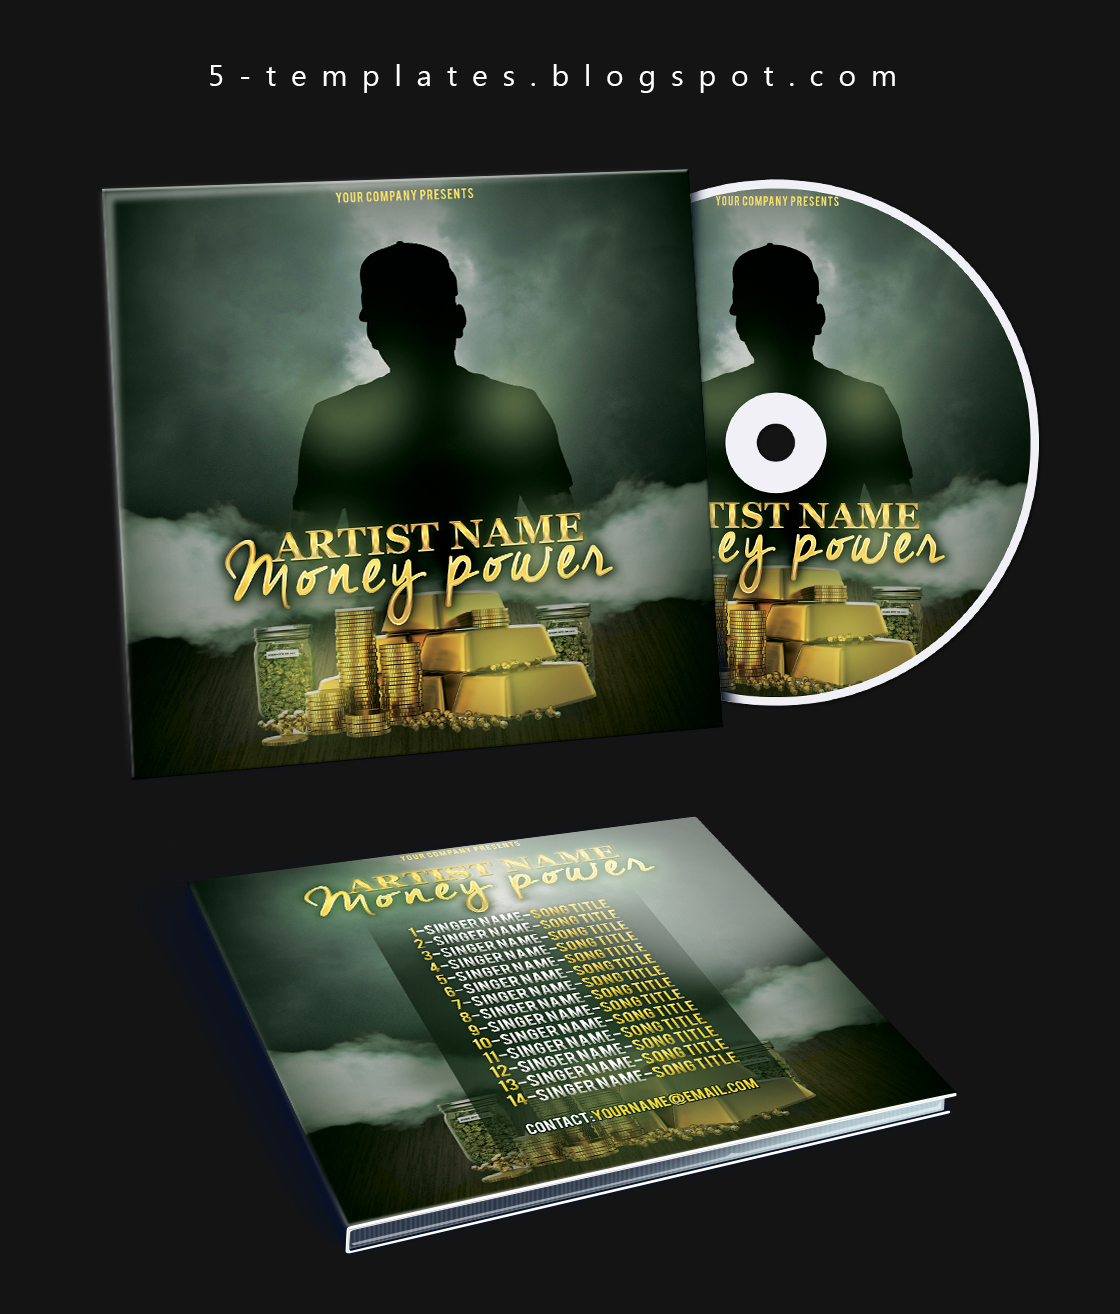 Download 64 Free Cd Dvd Cover Templates In Psd For The Best Music And Video Premium Version Free Psd Templates